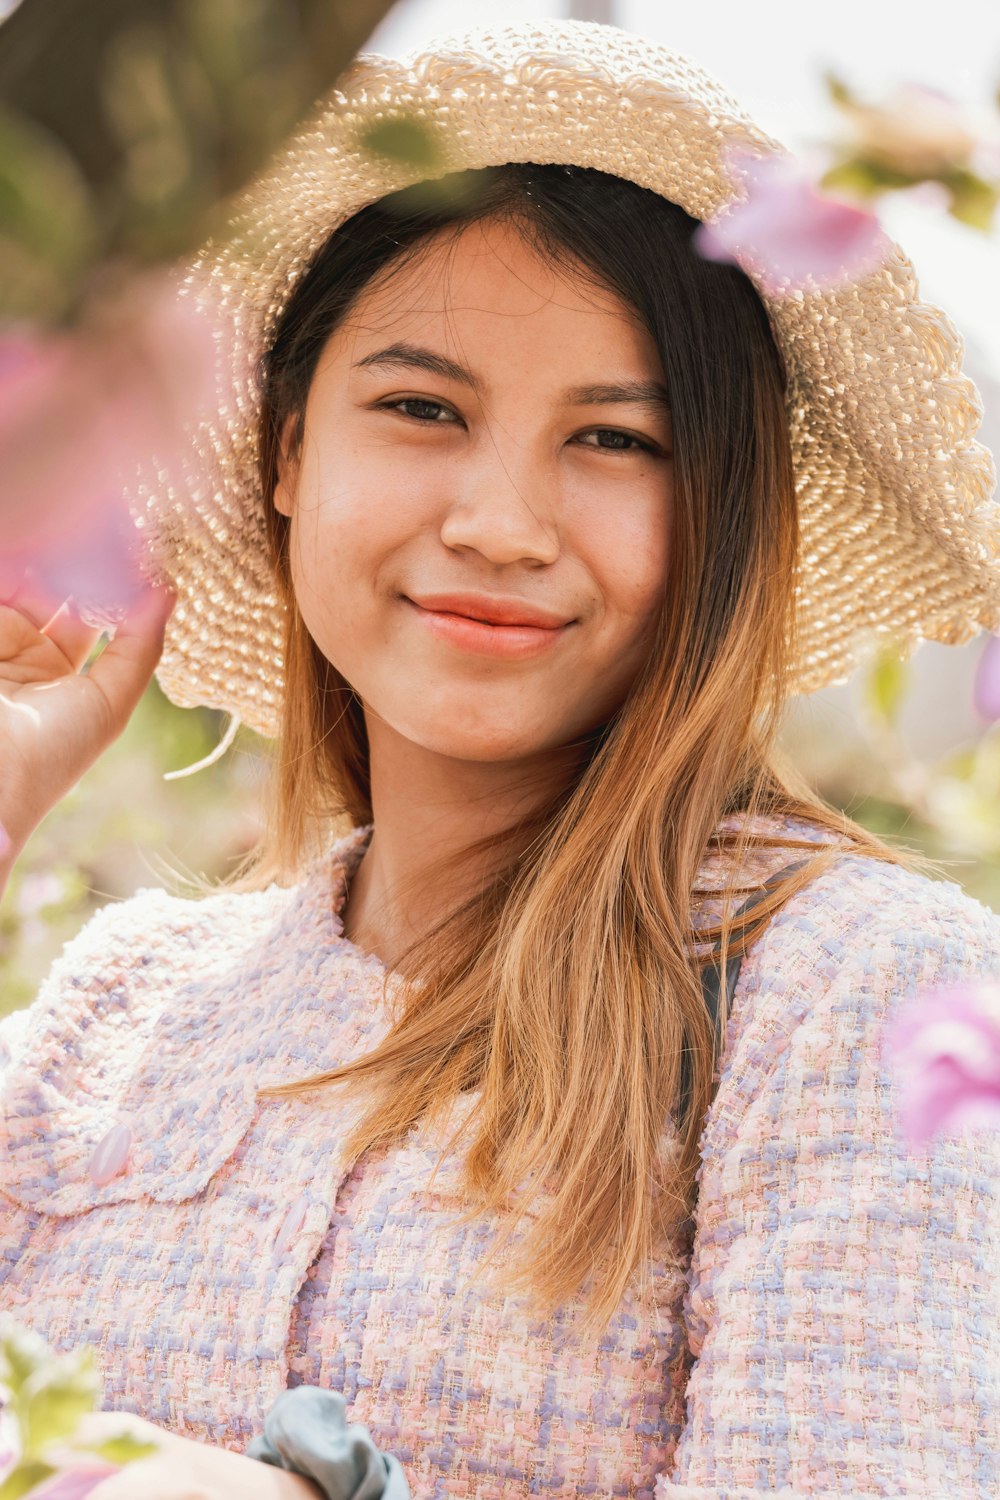 a young woman wearing a straw hat in a field of flowers